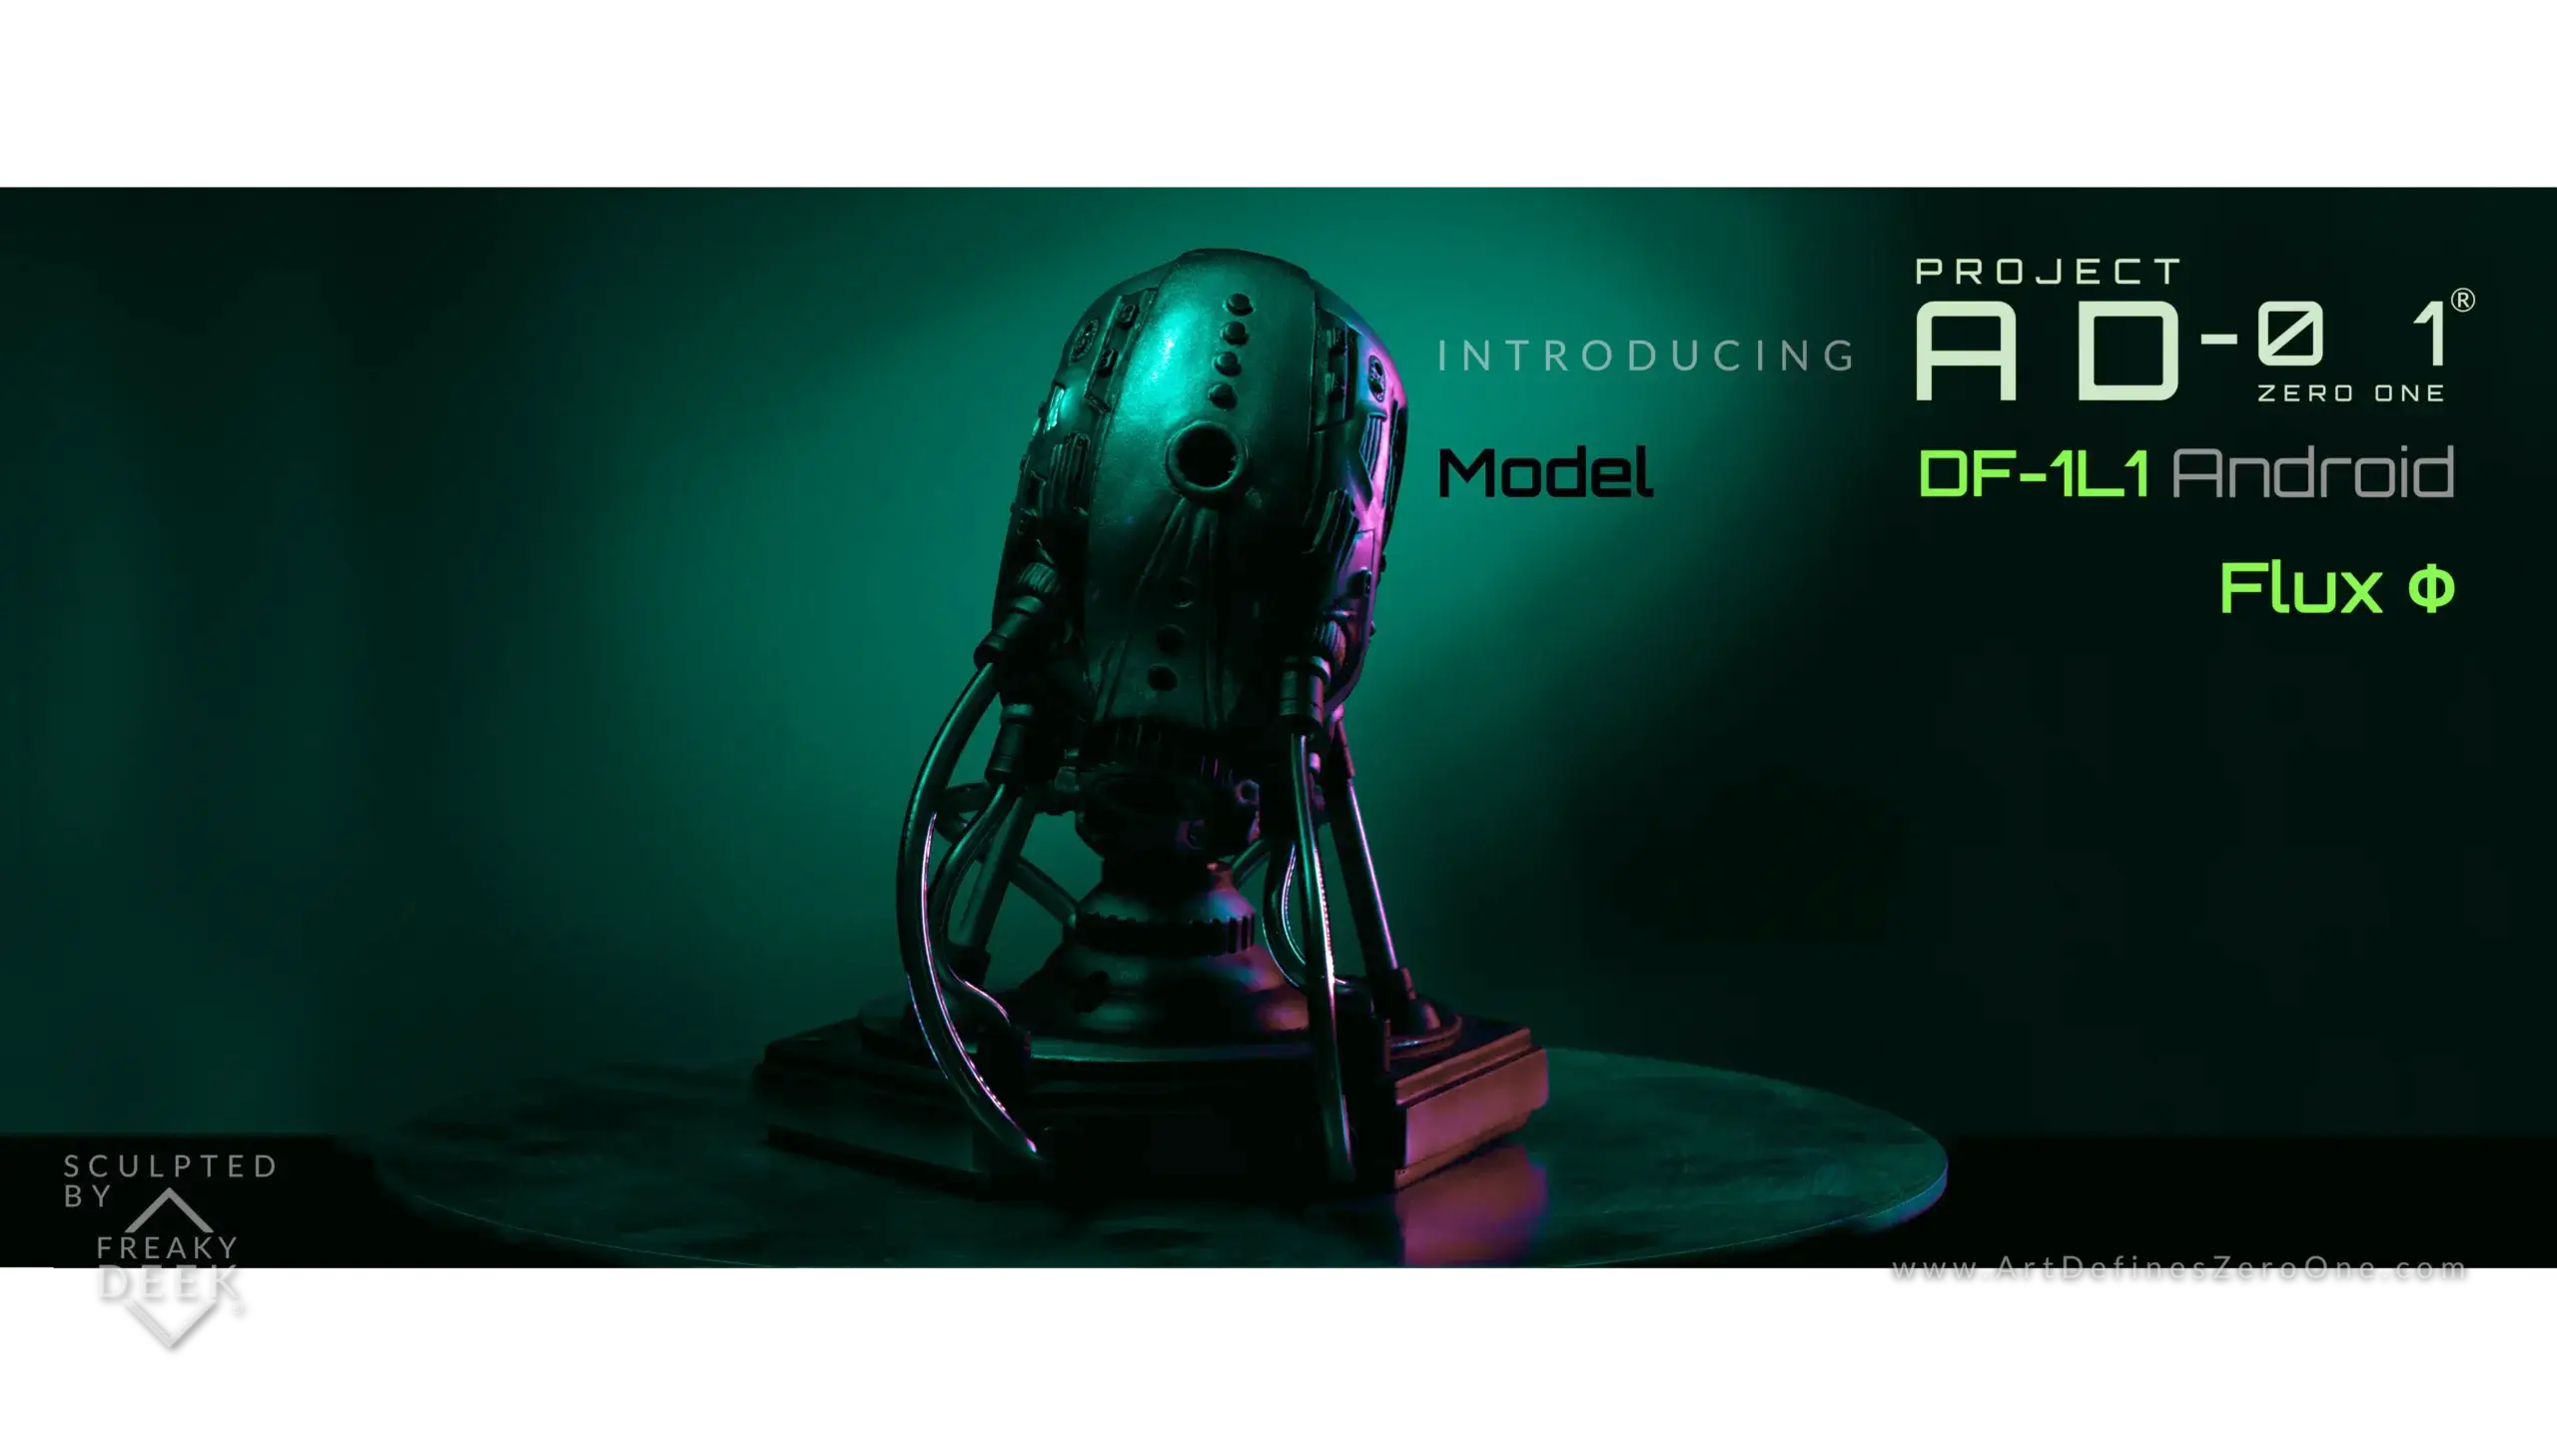 Project AD-01 handmade android green sculpture Flux back view